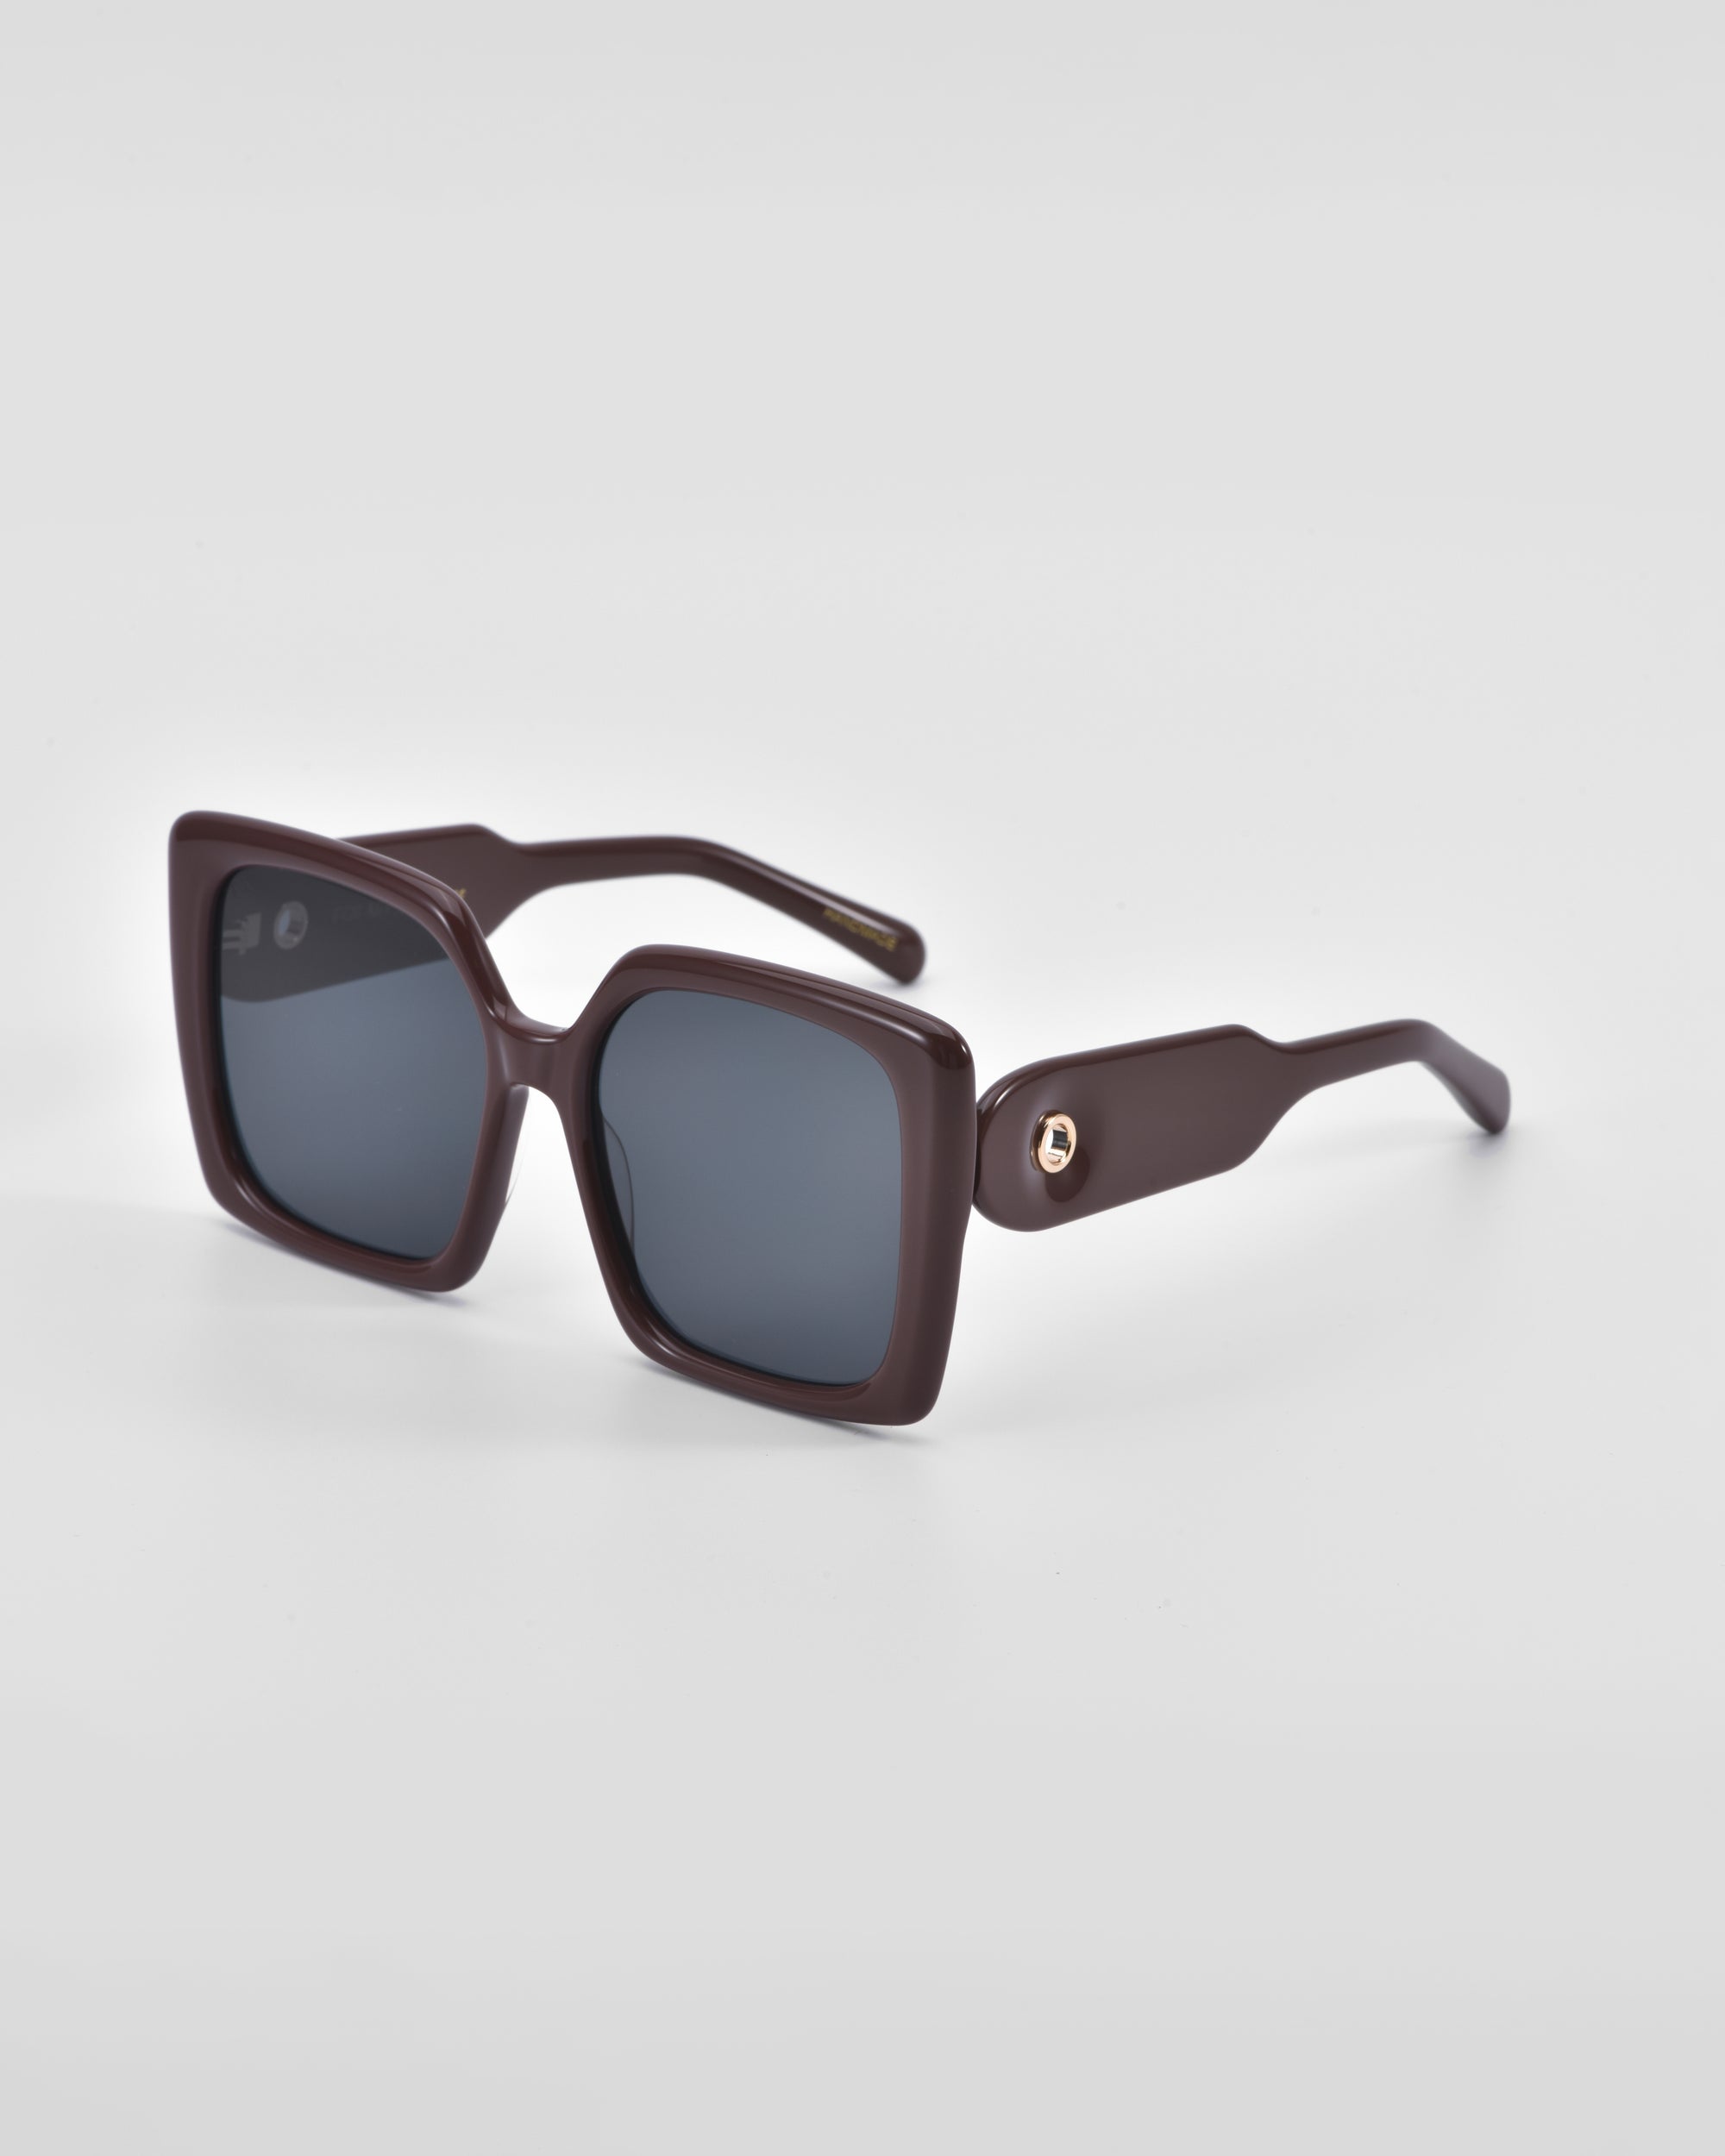 A pair of stylish, oversized, square-framed For Art&#39;s Sake® Eos sunglasses with dark lenses and thick, dark brown frames. The sunglasses are positioned against a plain white background, showcasing their design details clearly.